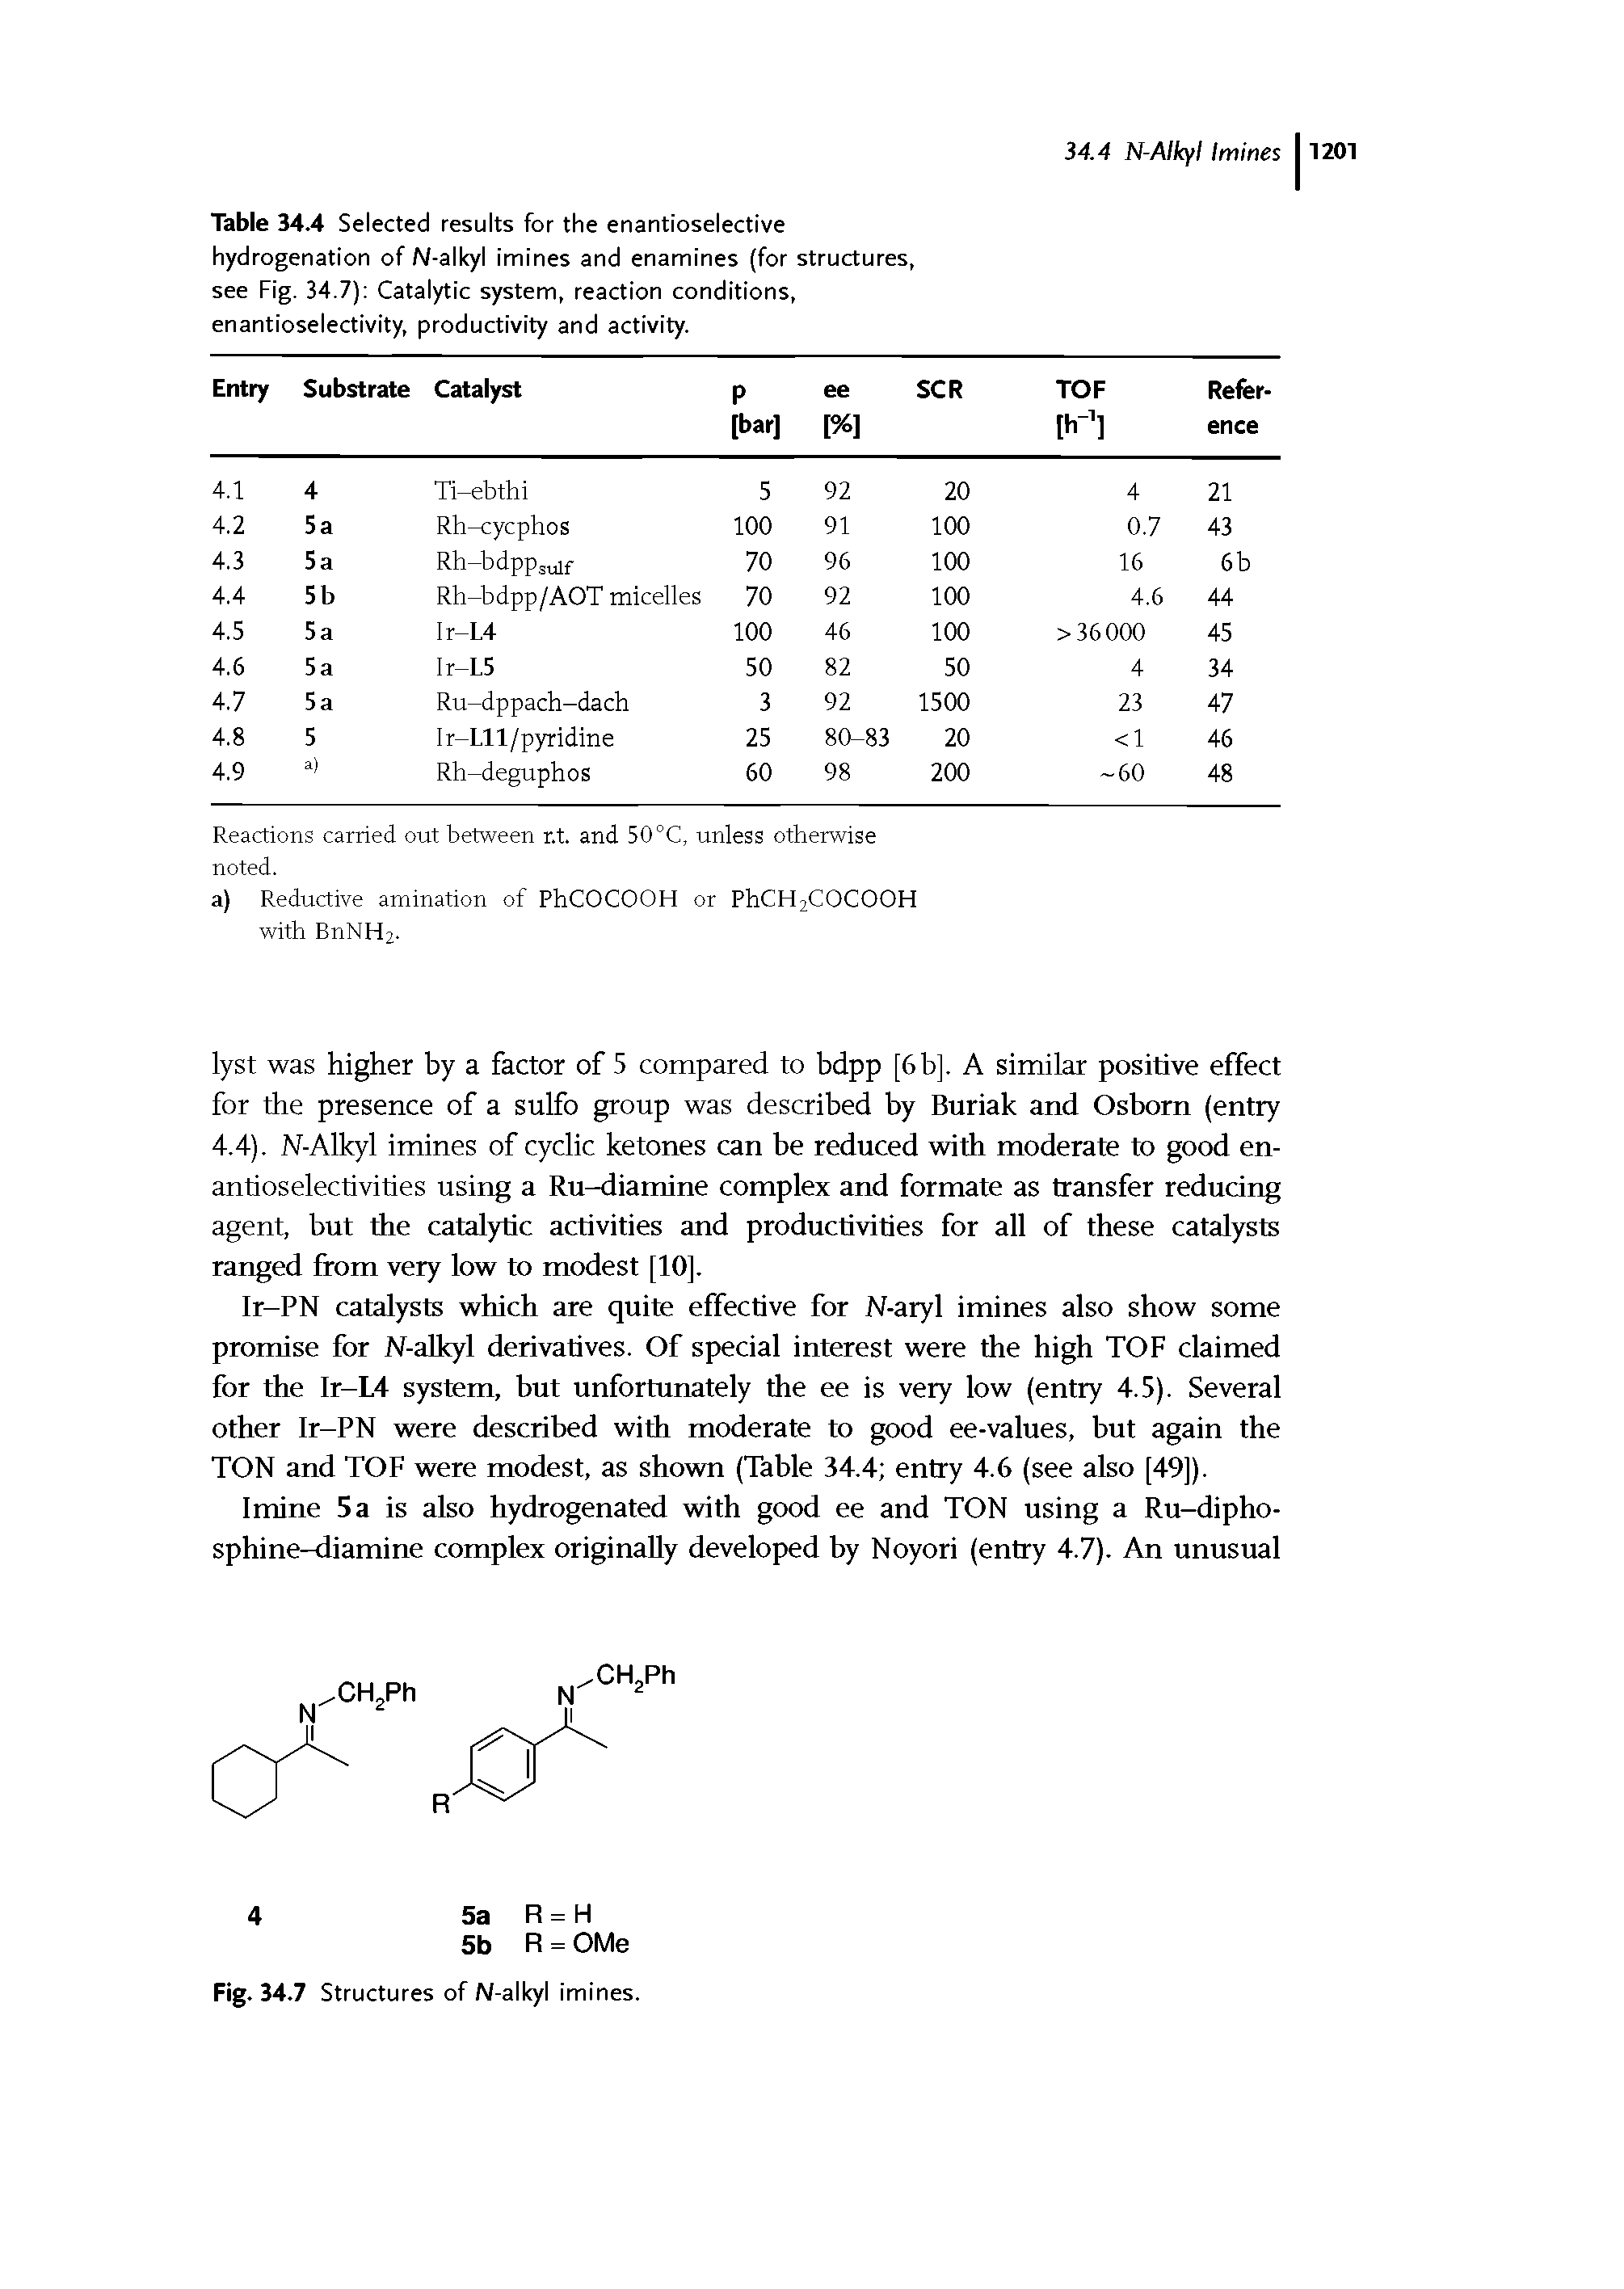 Table 34.4 Selected results for the enantioselective hydrogenation of N-alkyl imines and enamines (for structures, see Fig. 34.7) Catalytic system, reaction conditions, enantioselectivity, productivity and activity.